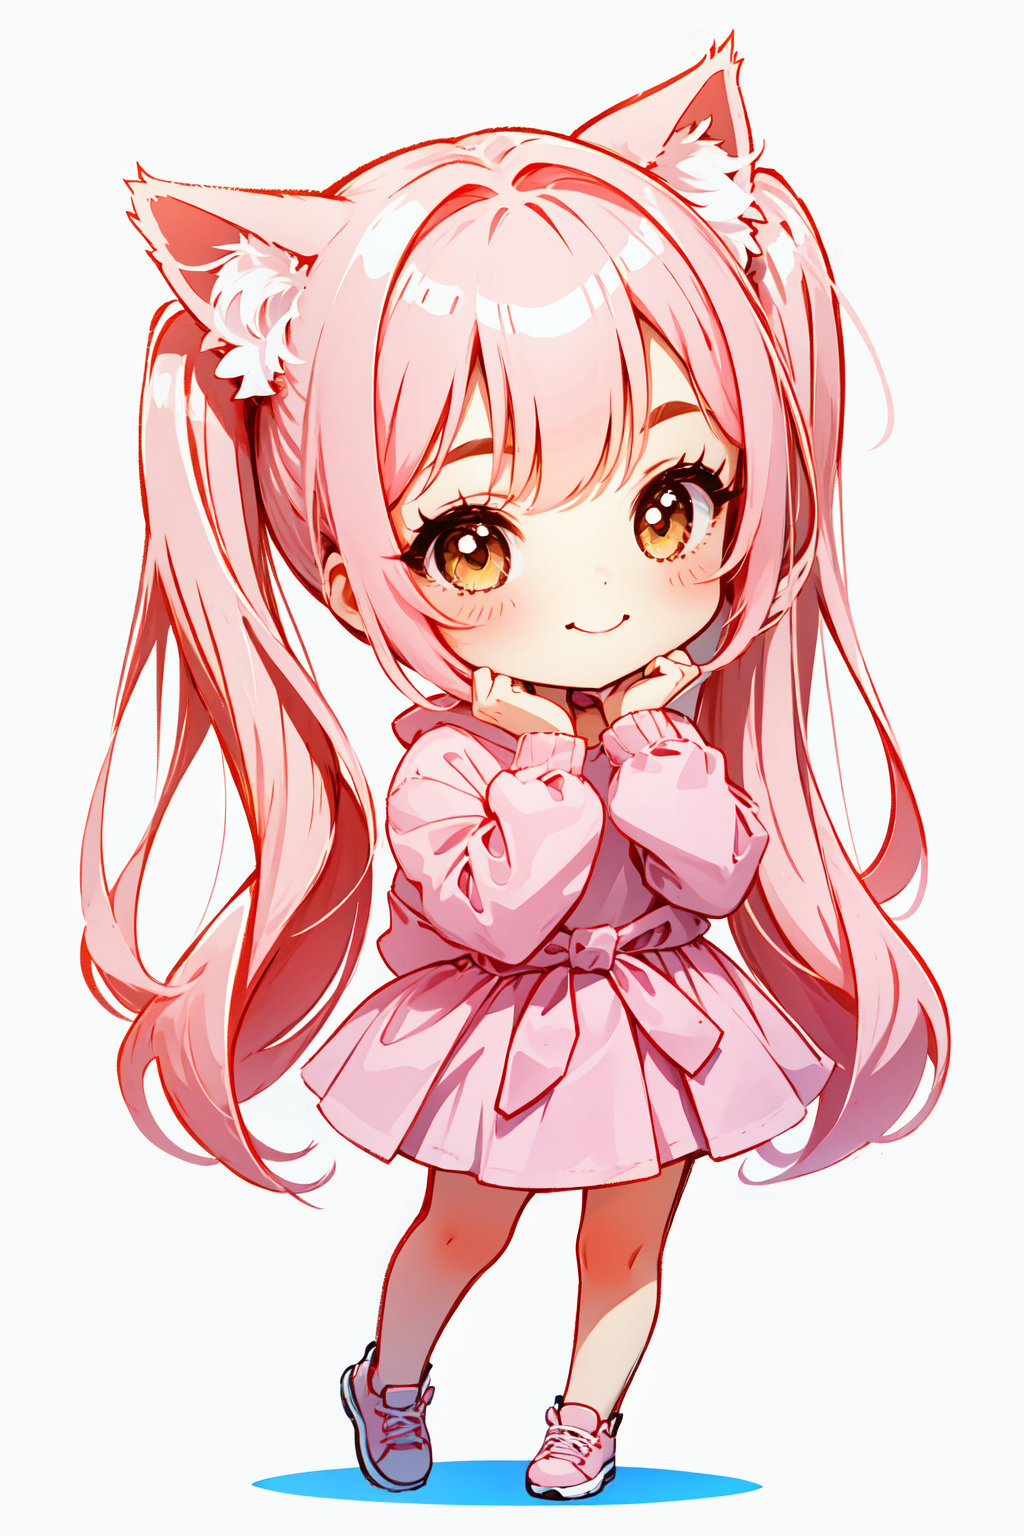 Cute girl, White background, full body image, cat girl, twintails hairstyle, pink hair, hands in waist, she's happy. Chibi,Chibi